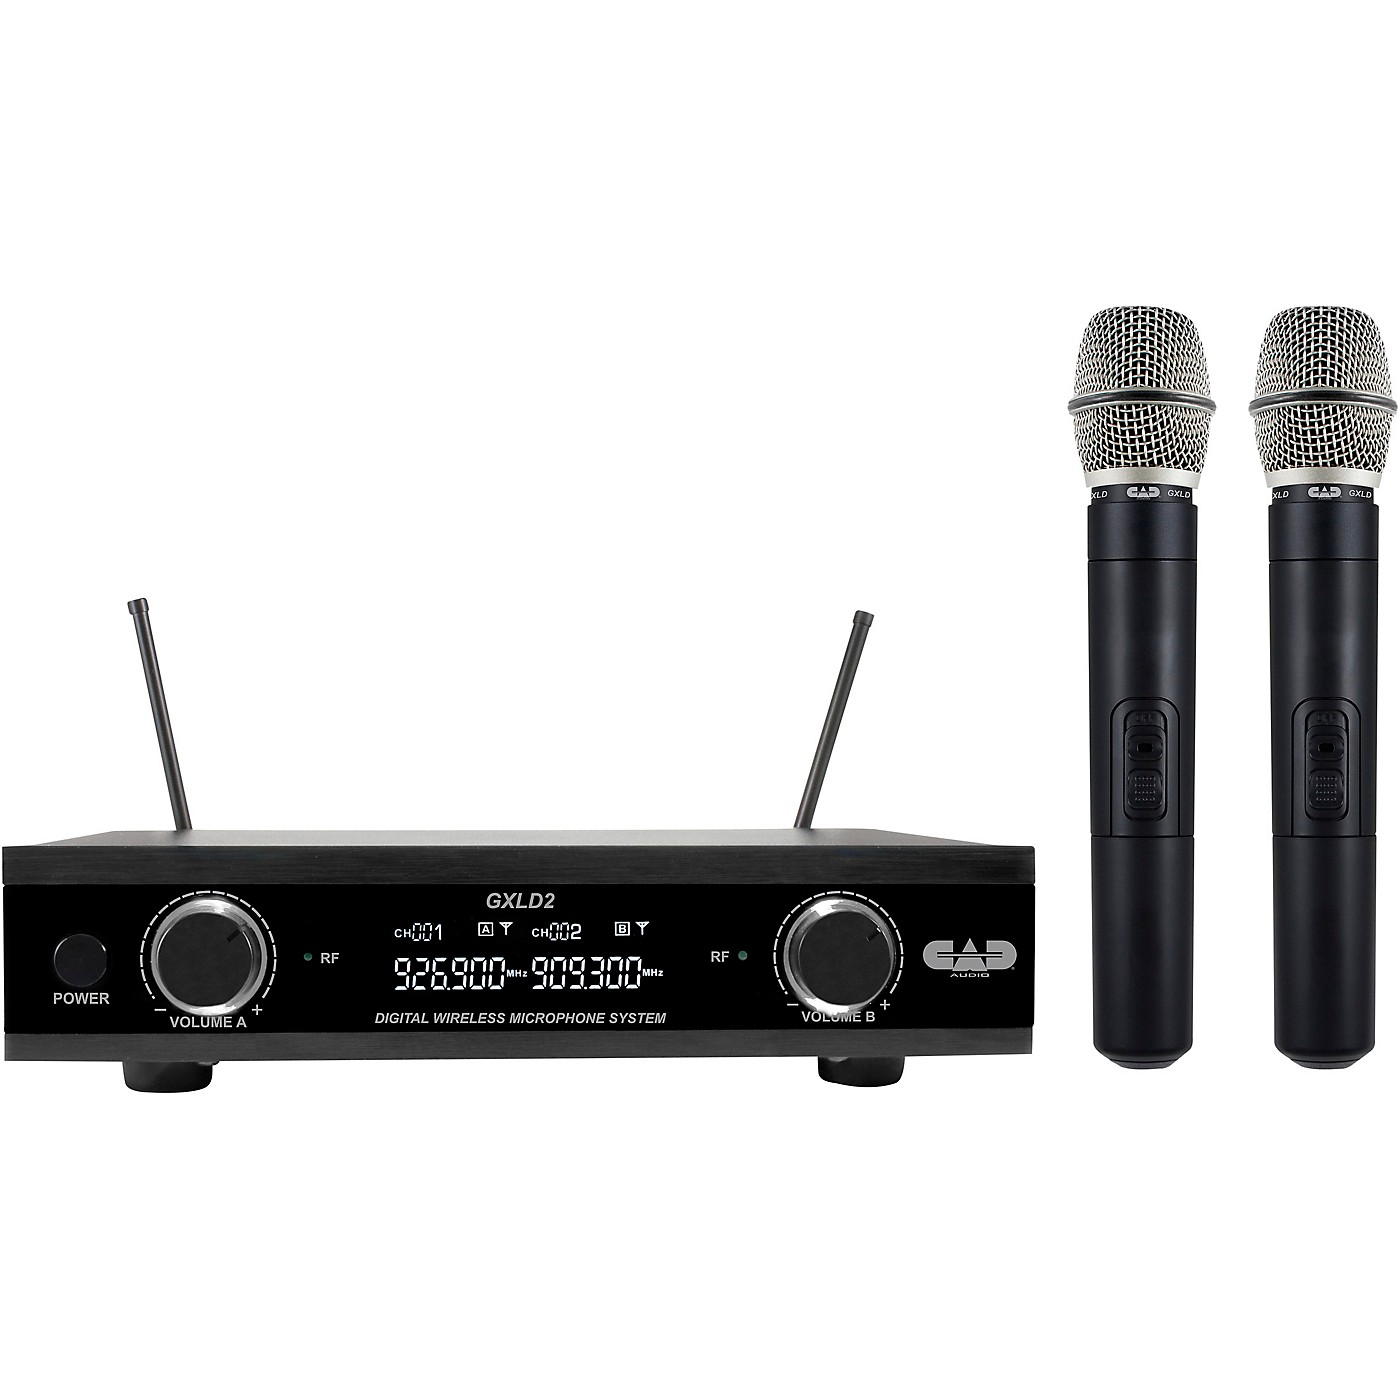 CAD GXLD2HH Handheld Microphone Wireless Systems (902.9/915.5MHz, 909.3/926.8MHz) thumbnail